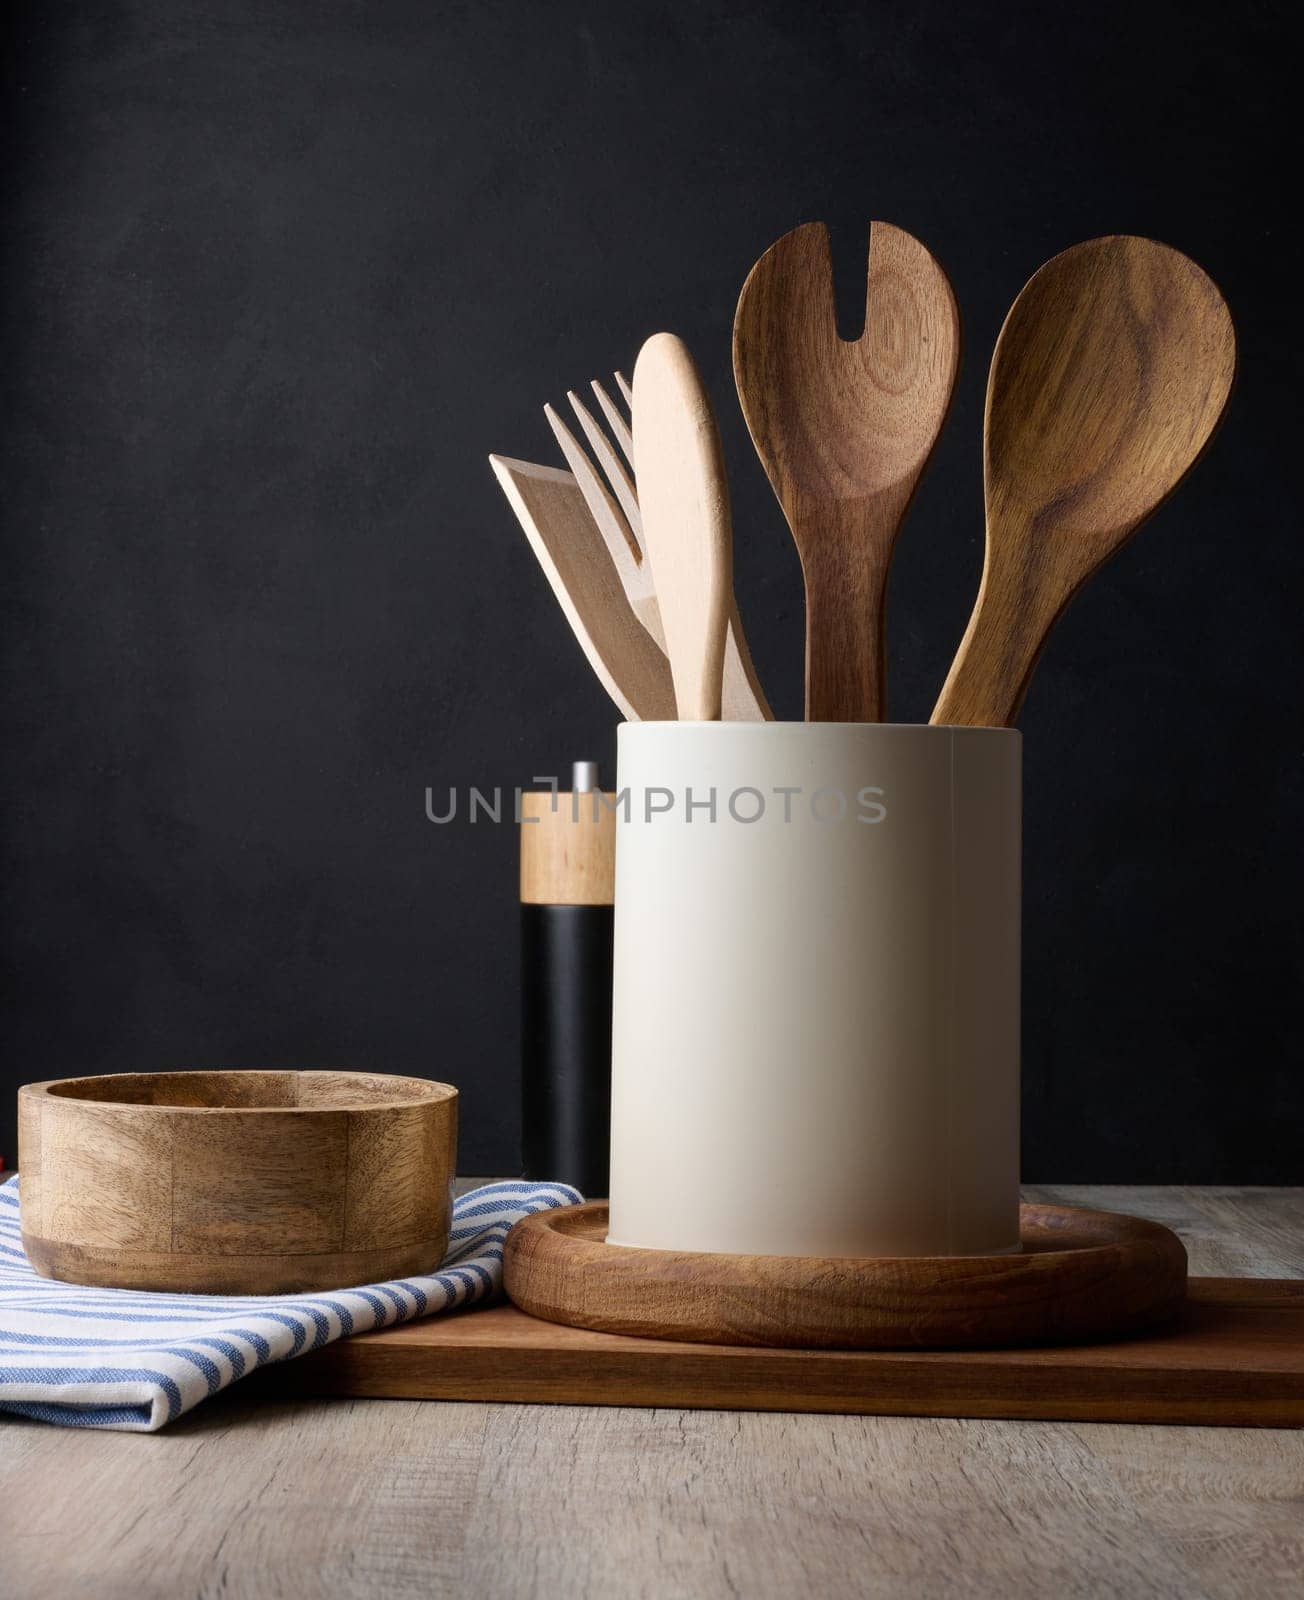 Empty bowl and wooden spoons on a table, black background by ndanko